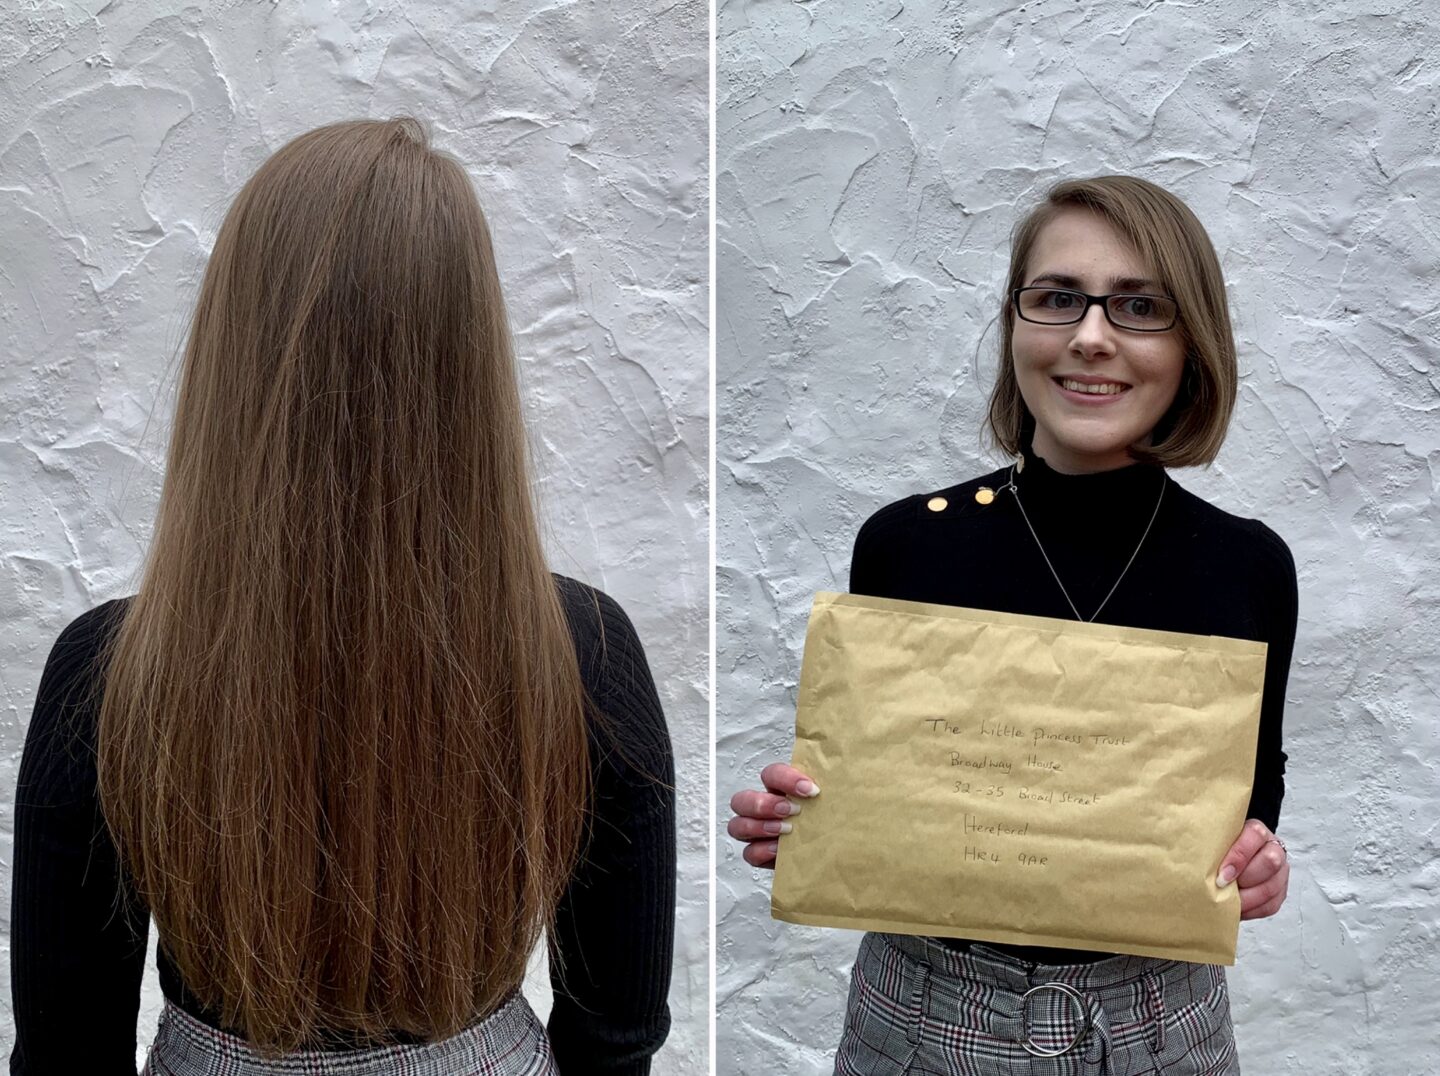 Before and after photos of Elin side by side. The left shows her long brown hair cascading down her back whilst the one on the right shows her with a bob that’s styled to curve towards her face at the front. Strands on the right have been tucked behind her ear. She also holds a brown envelope with The Little Princess Trust address on it. Elin wears a black high neck top with gold buttons along the left shoulder which are visible now all the hair is gone, and has paired the top with grey check trousers. She stands in front of a white wall in both shots.